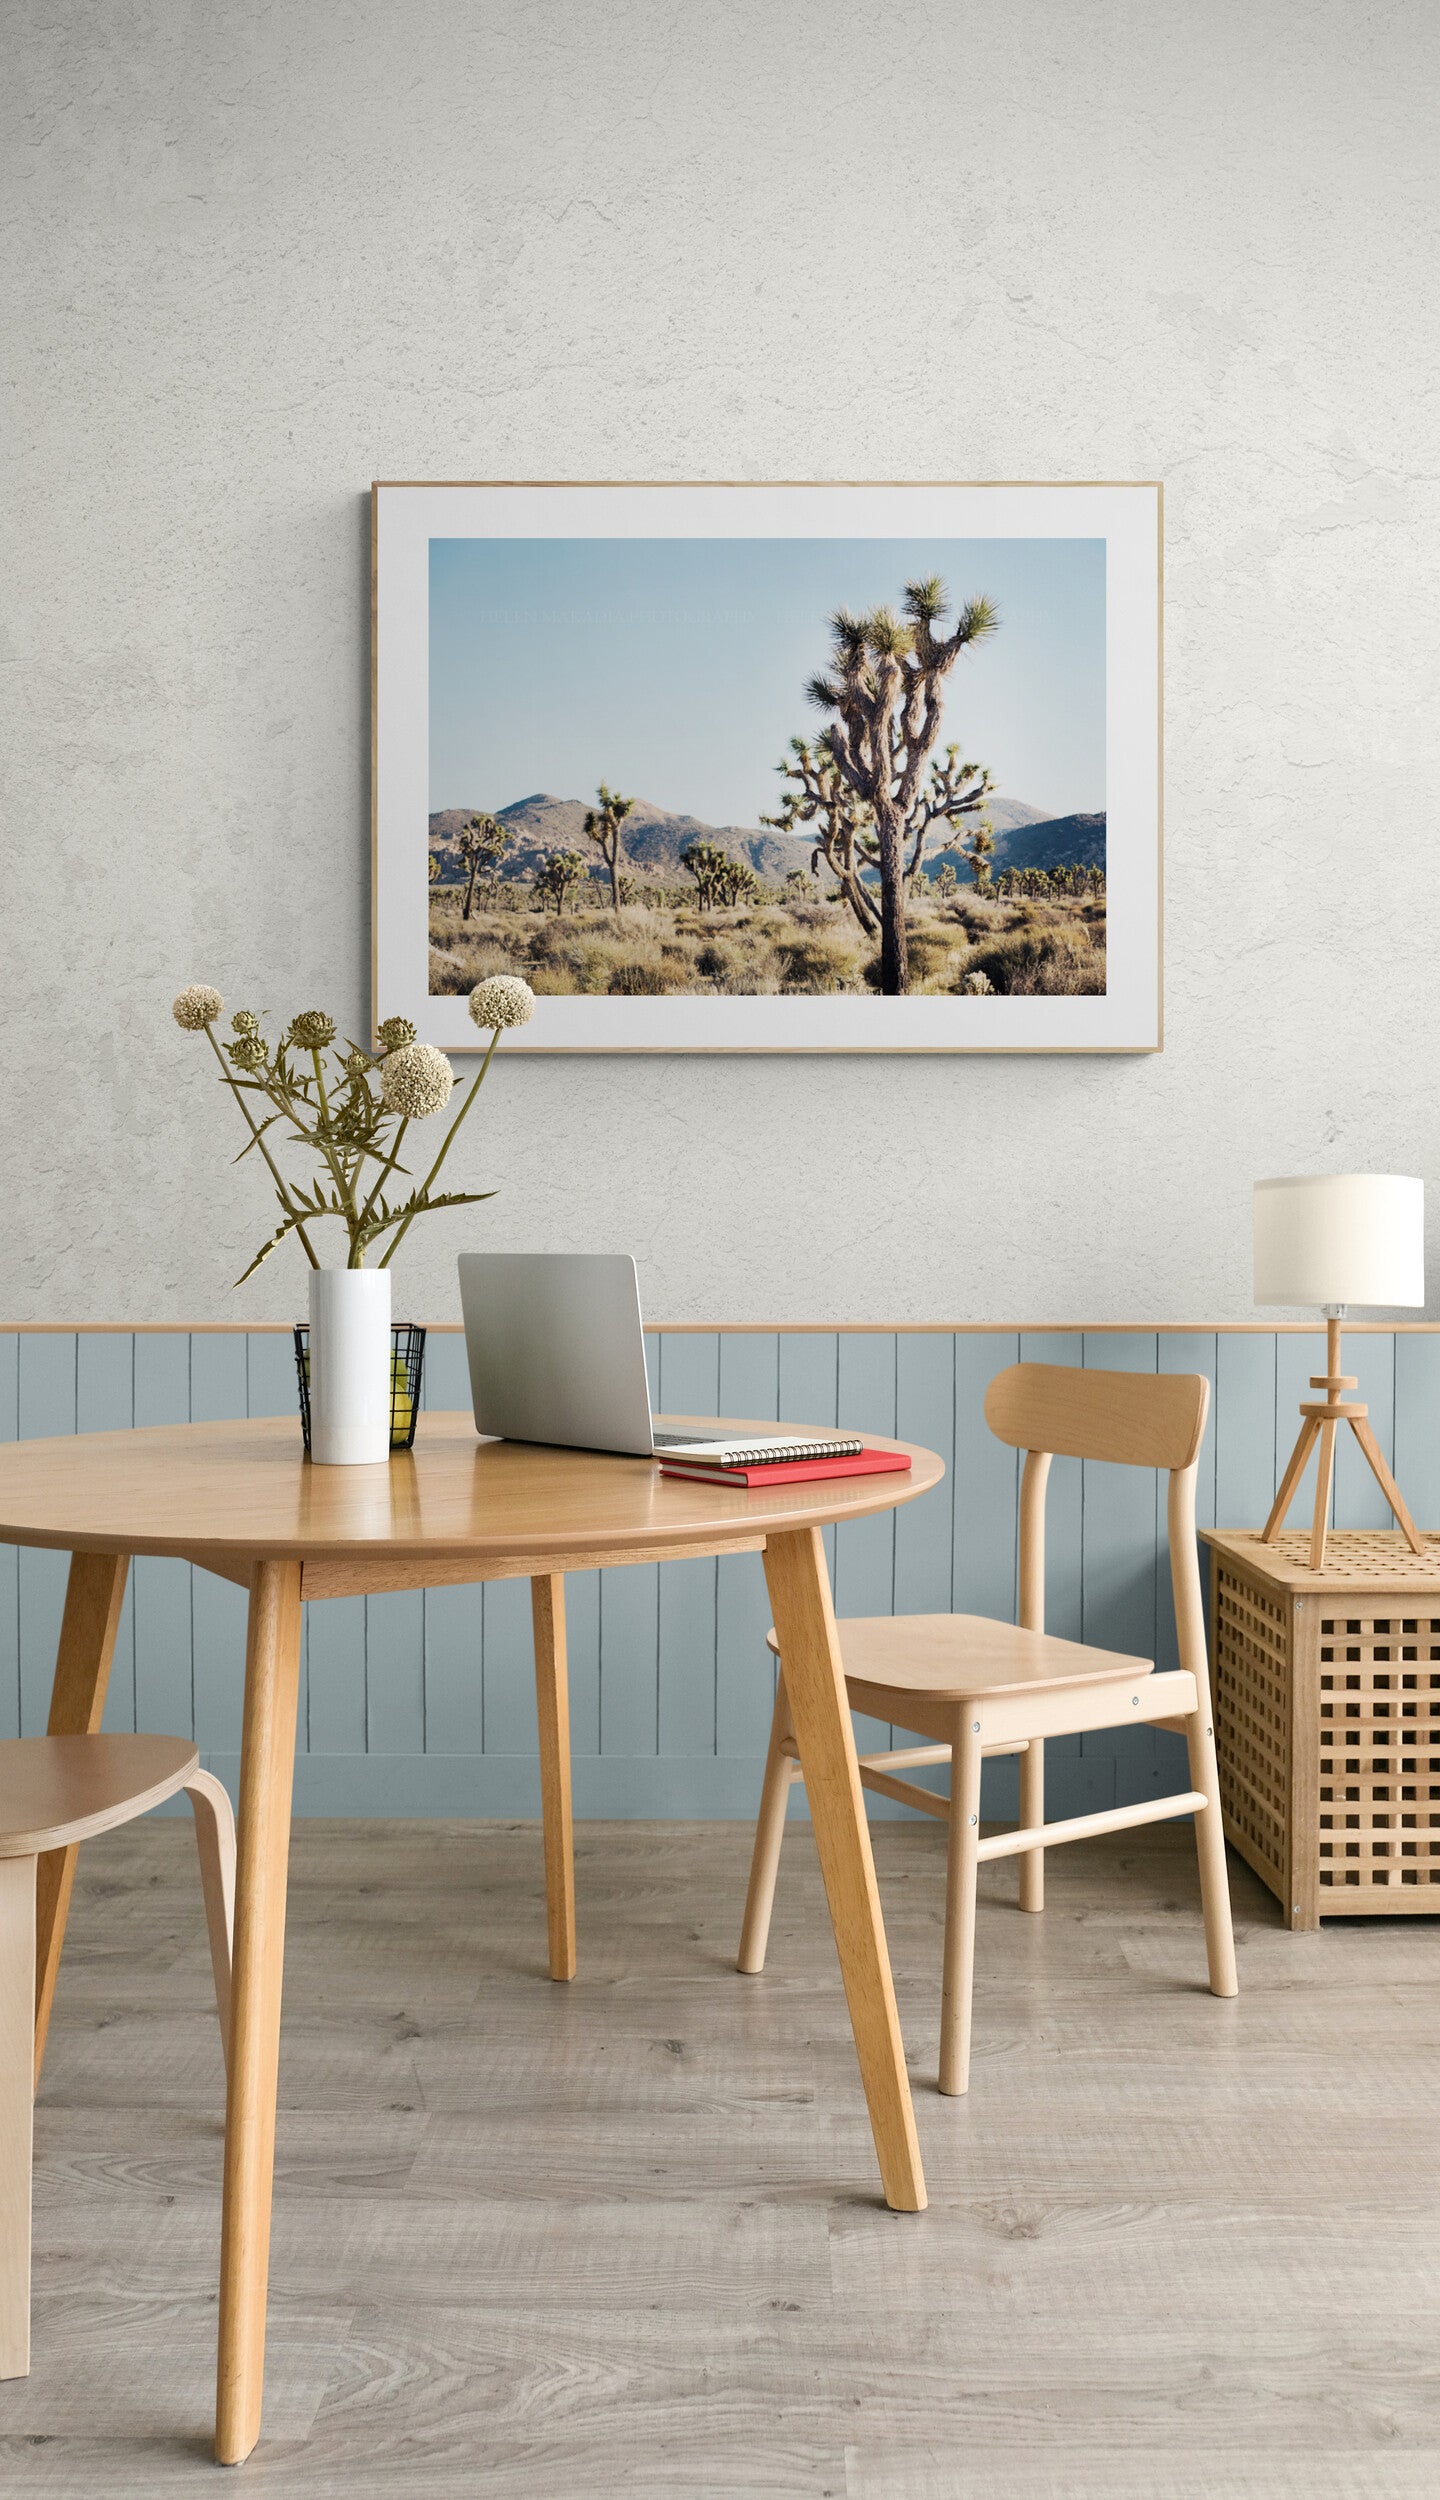 Joshua Tree National Park Photograph Print in a home office as wall art